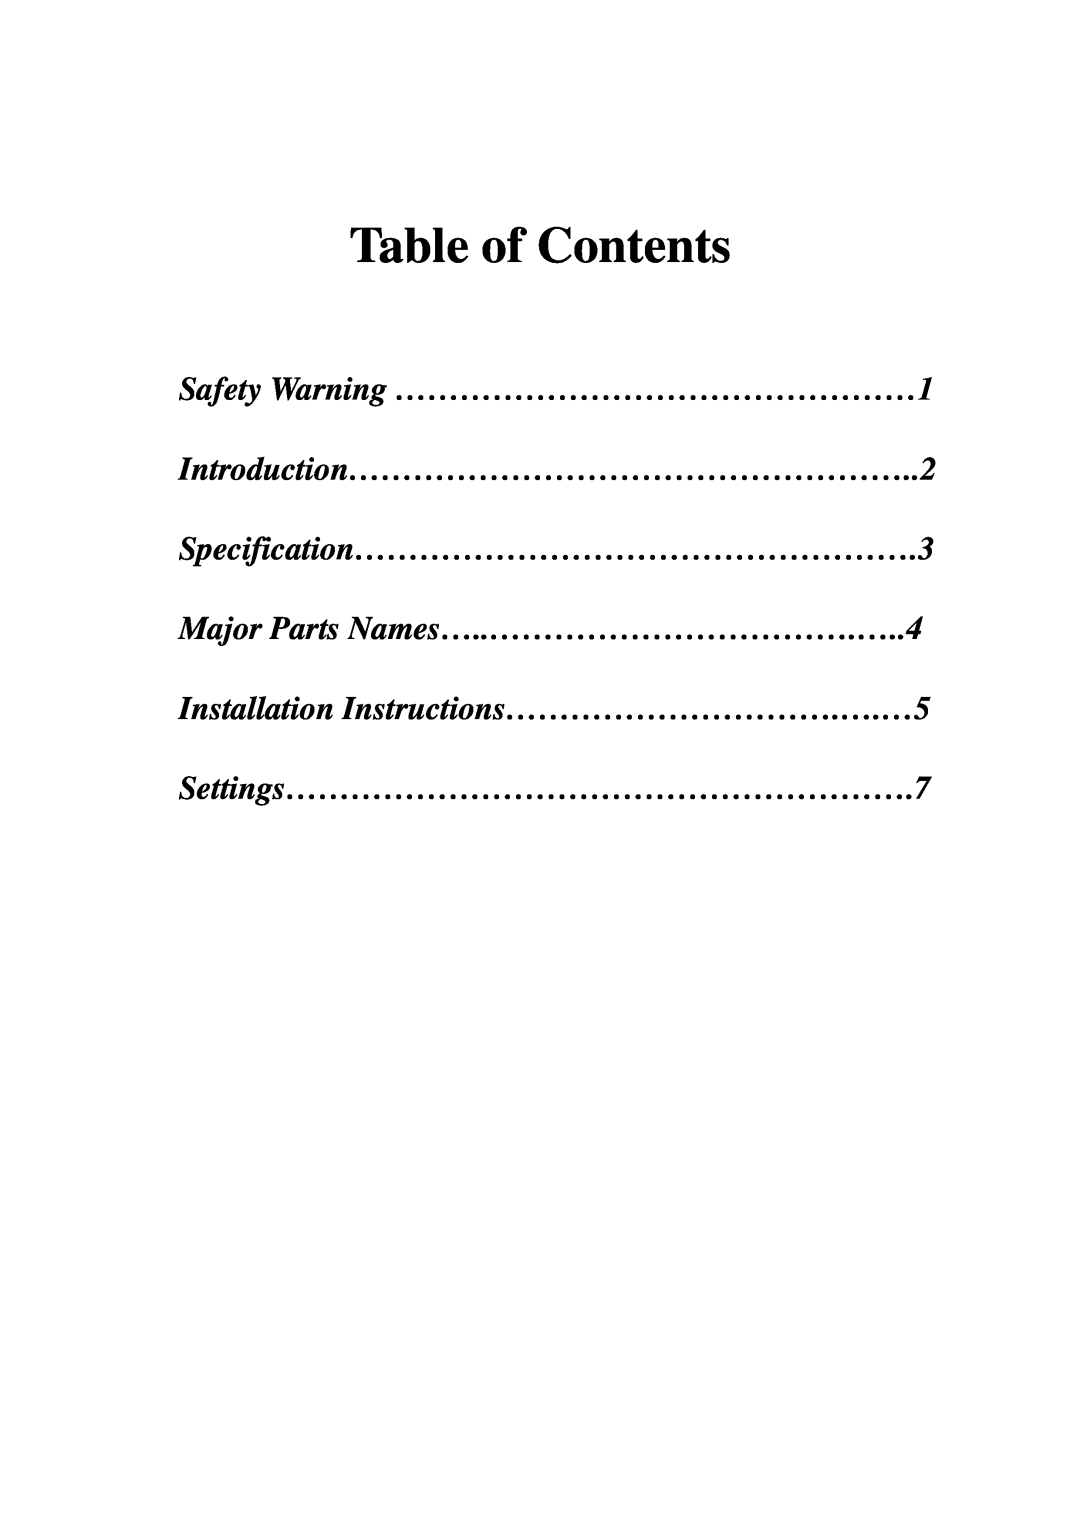 EverFocus EZ180 user manual Table of Contents, Safety Warning …………………………………………1 Introduction……………………………………………..2 